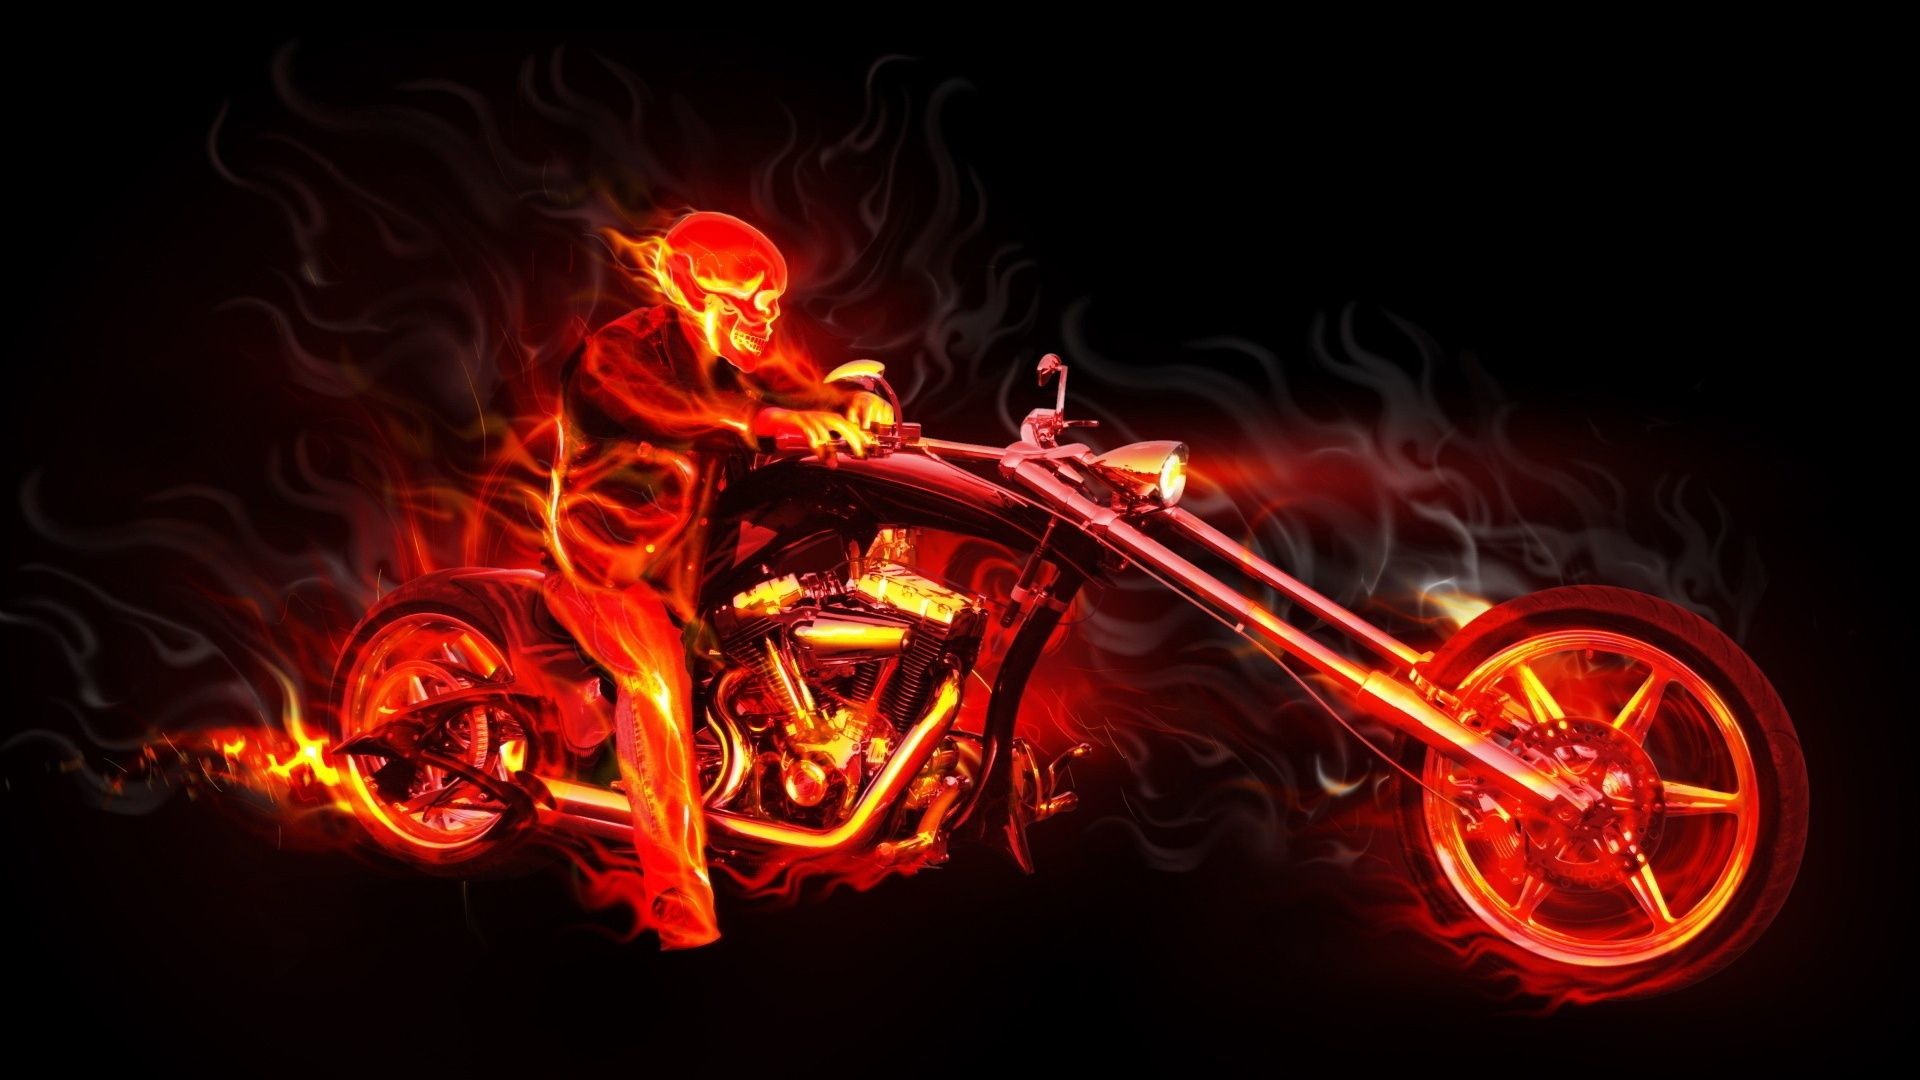 Ghost Rider Wallpapers Download Group 1600ã1200 Ghost - Ghost Rider Bike On Fire - HD Wallpaper 